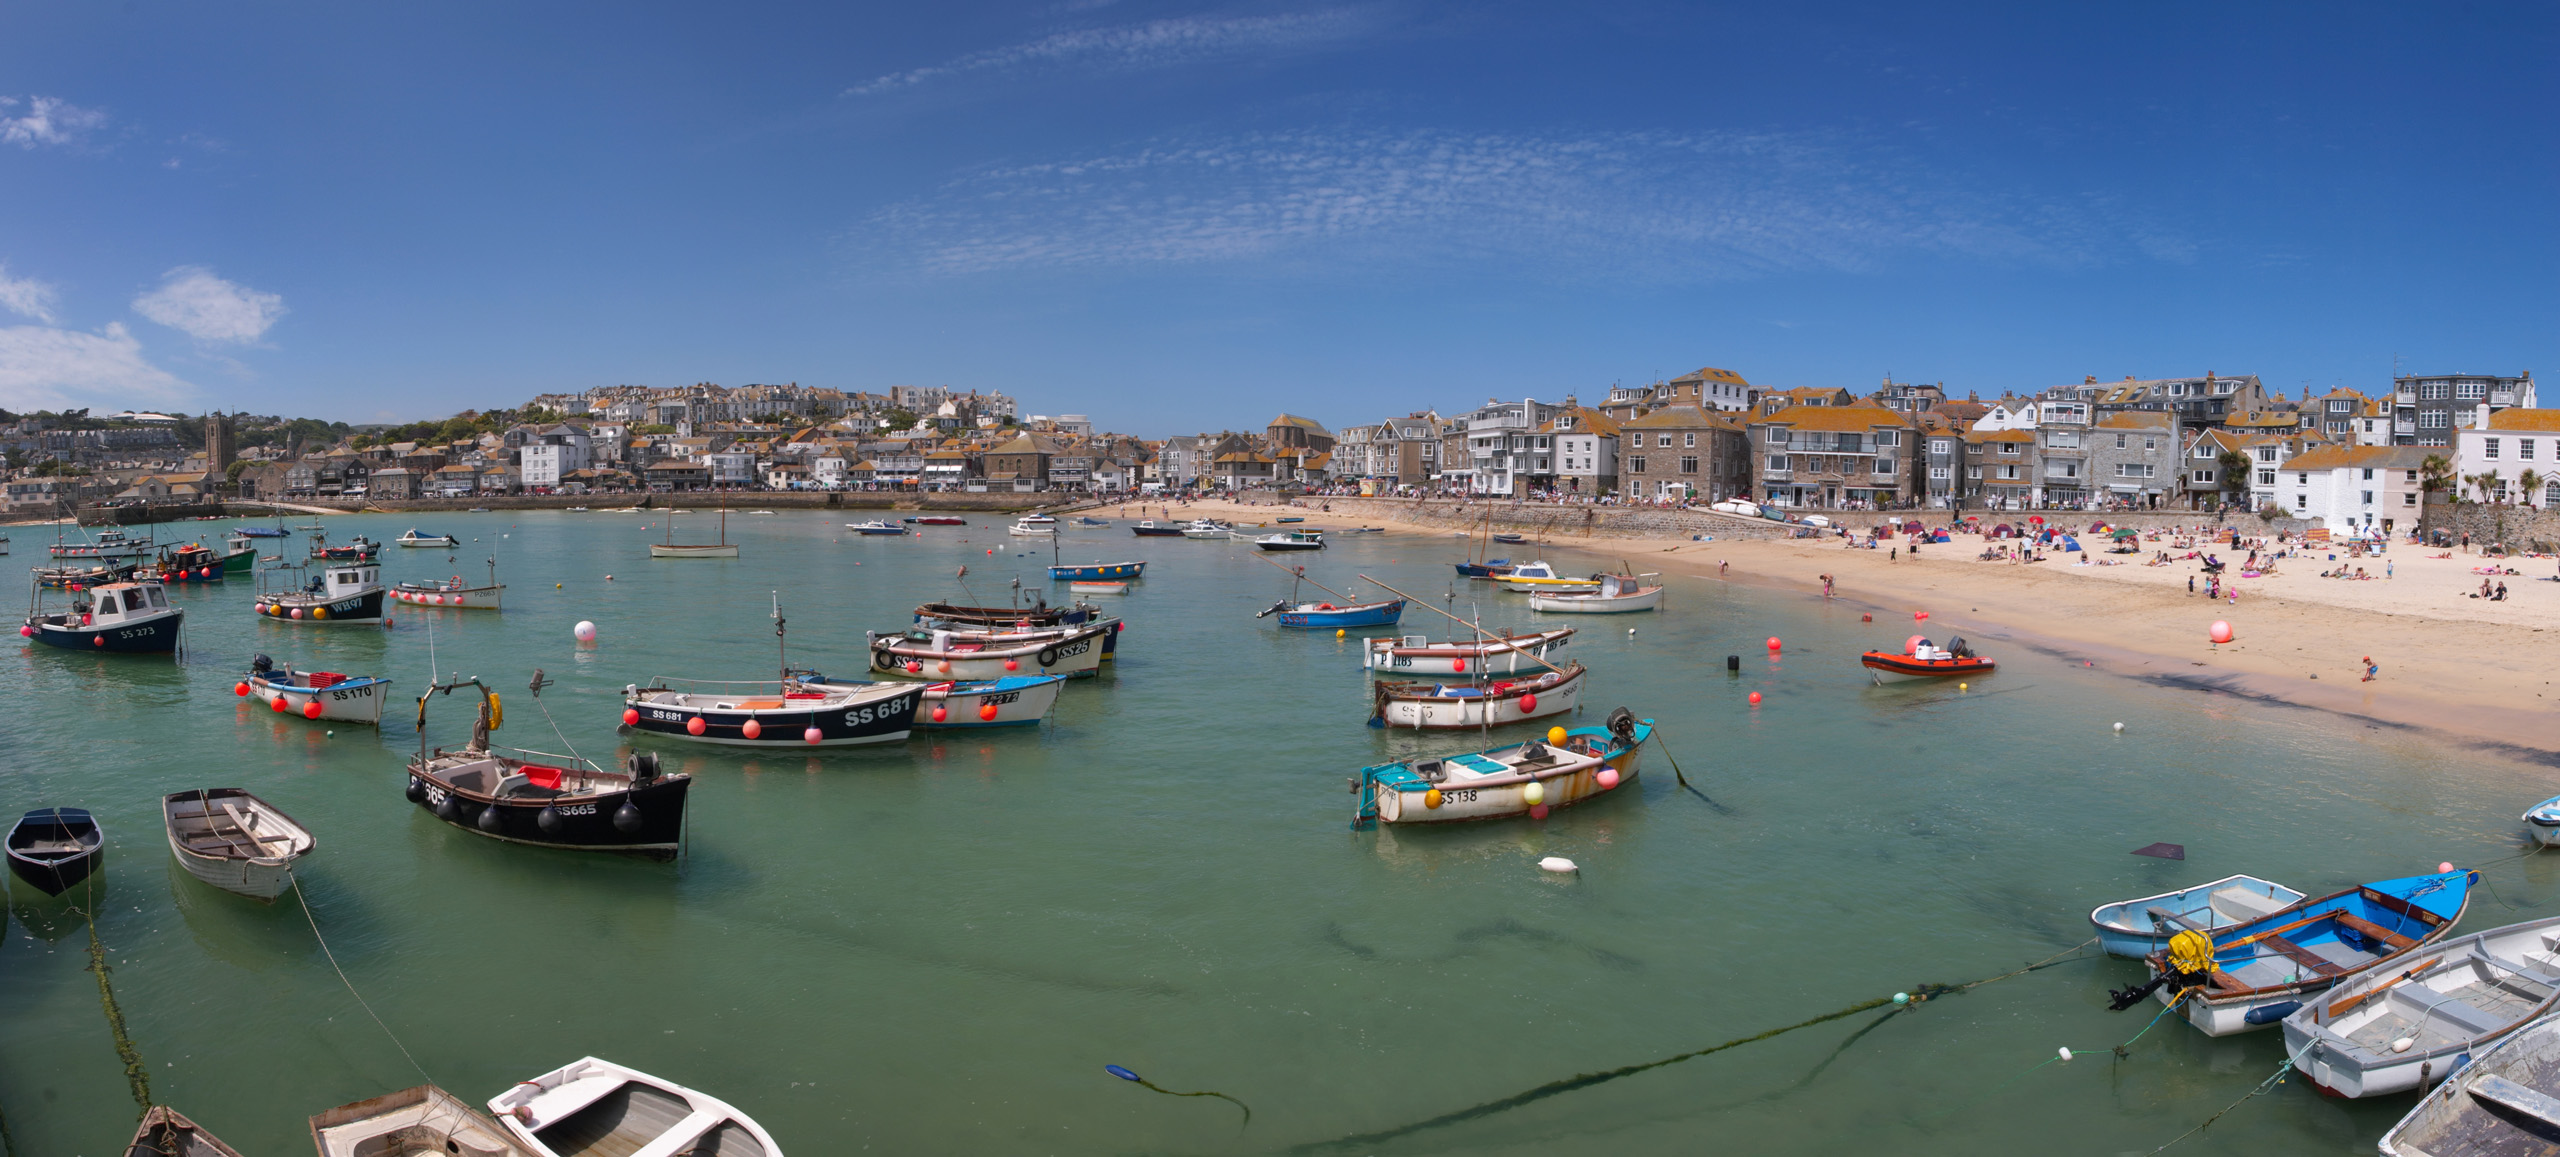 St Ives Panoramal From The Harbour Wall